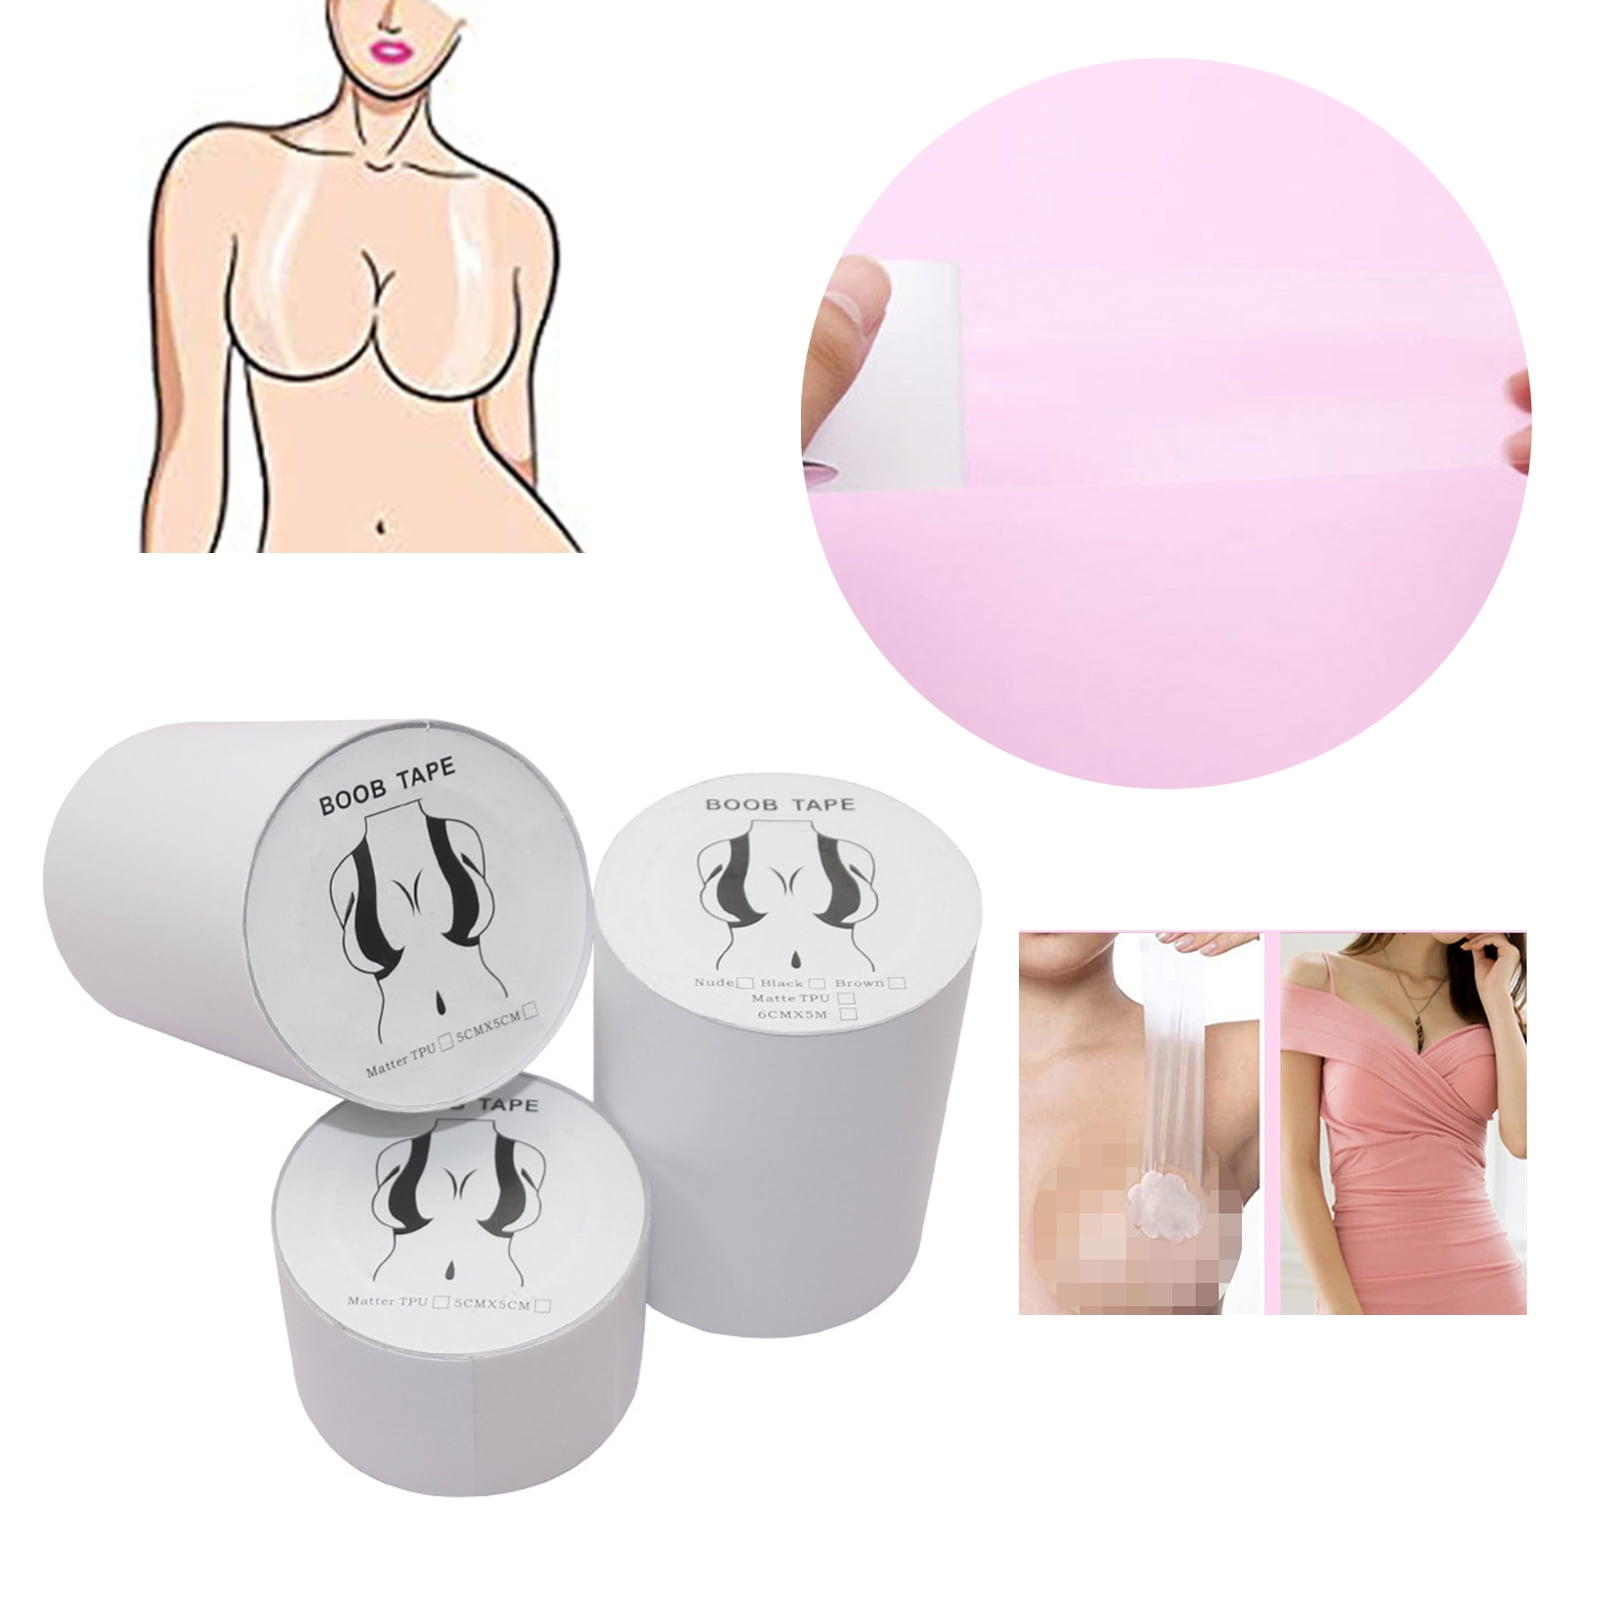 Generic Breast Lifting Tape - Color May Vary @ Best Price Online